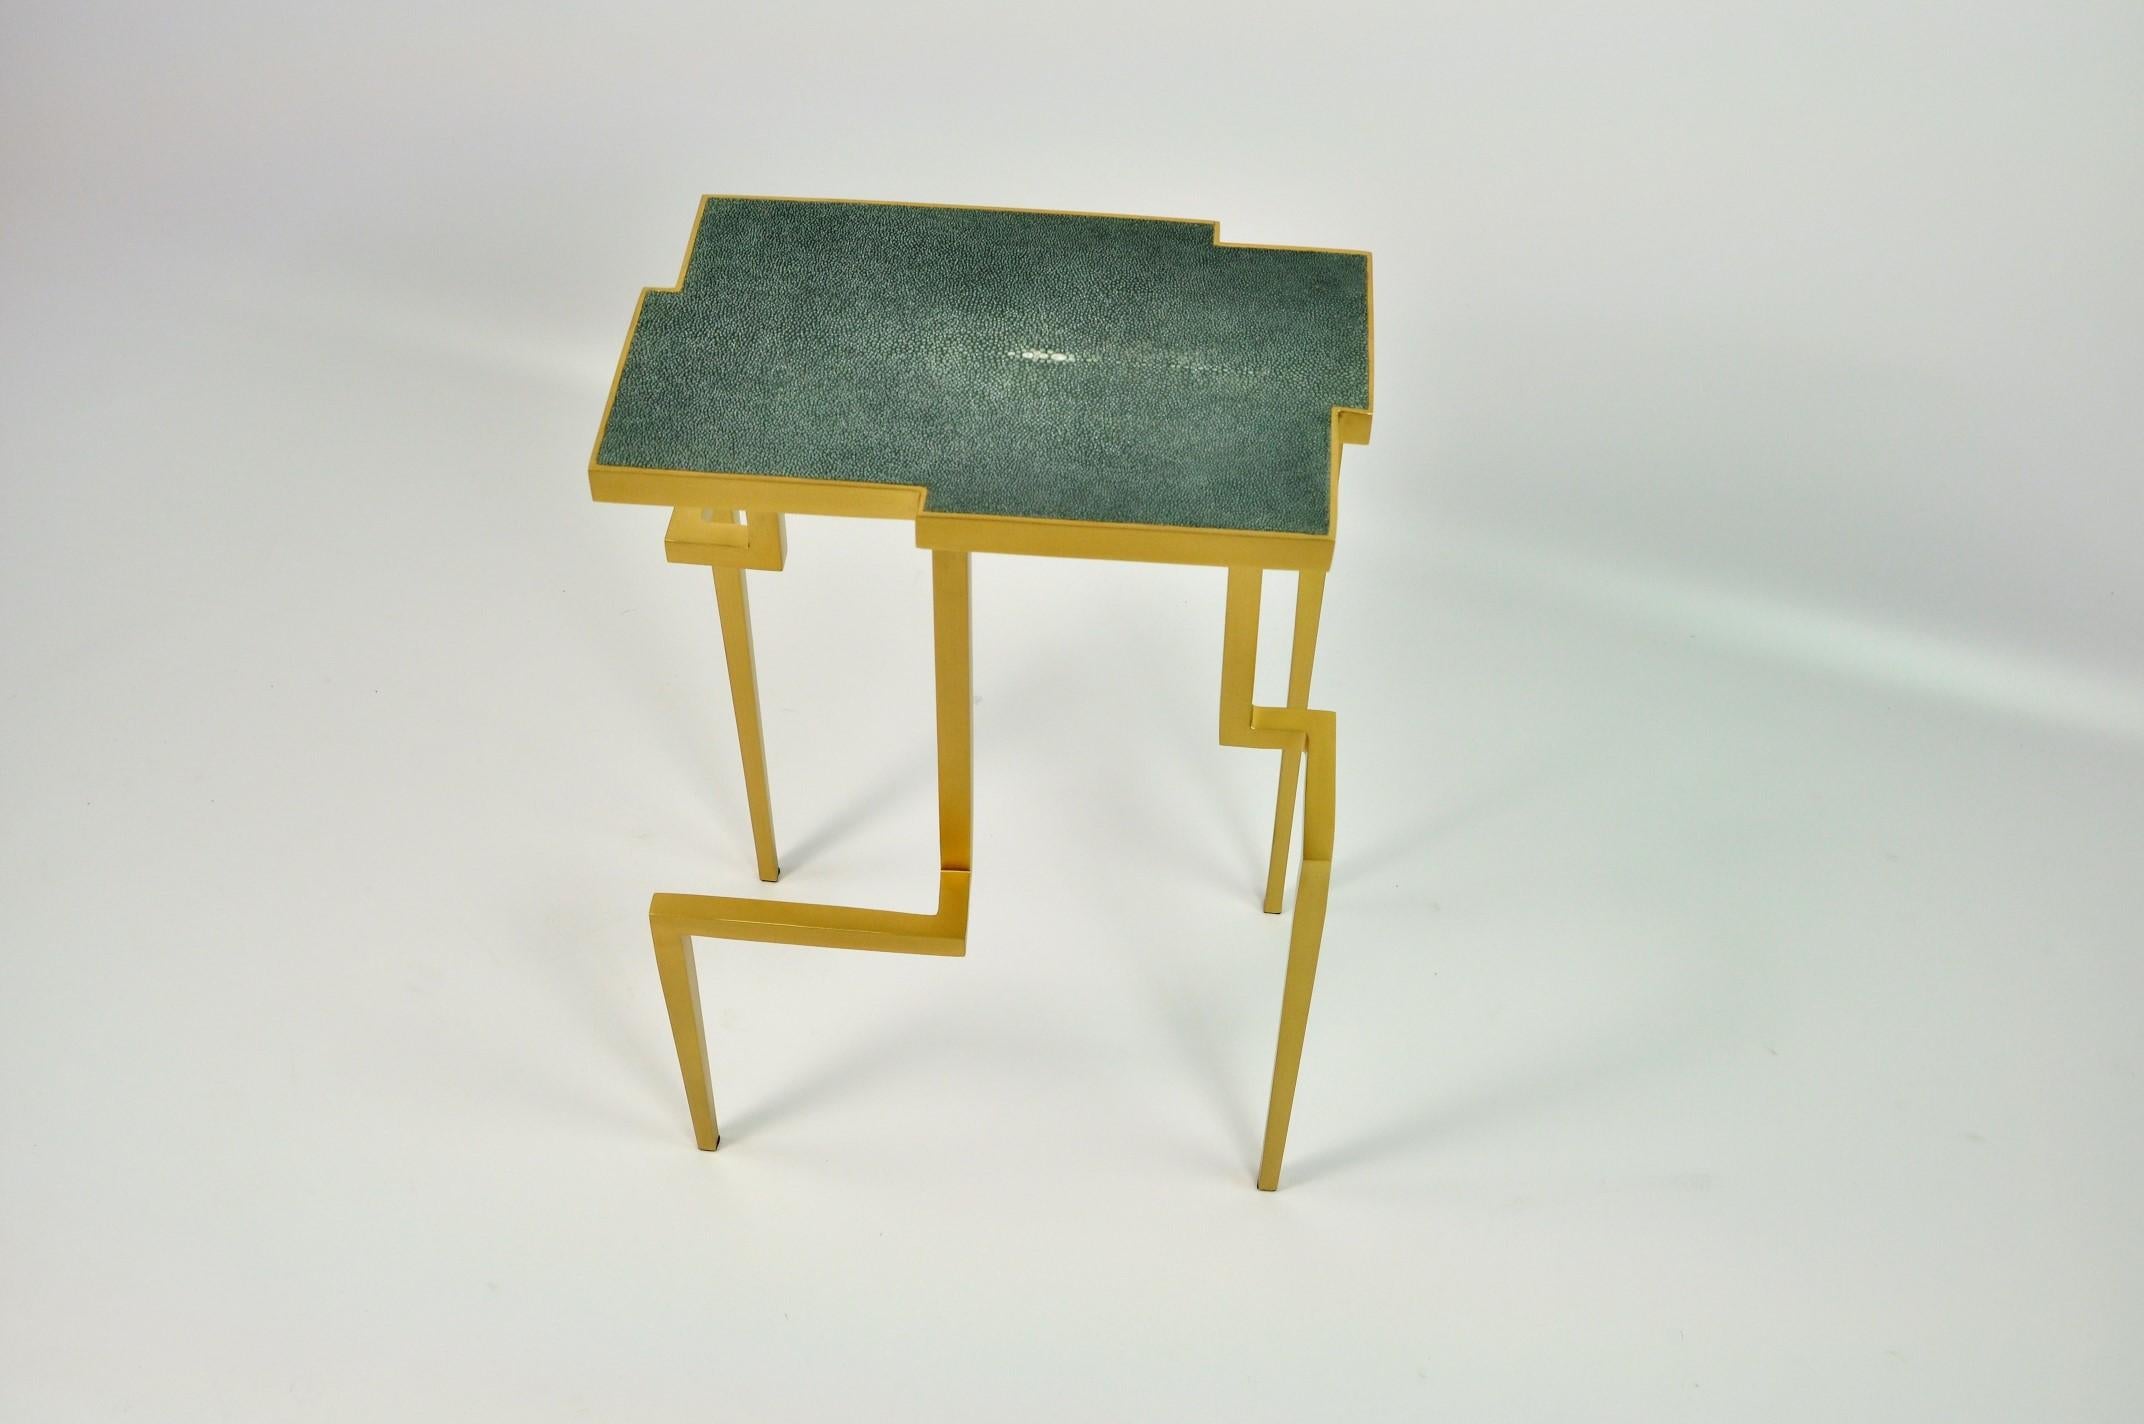 The PIXEL side table is made of solid brass with a genuine shagreen top in a nice jungle green color.
The brass has been brushed to give a modern and soft aspect.
This side table is very versatile and can be placed anywhere in small or large room,